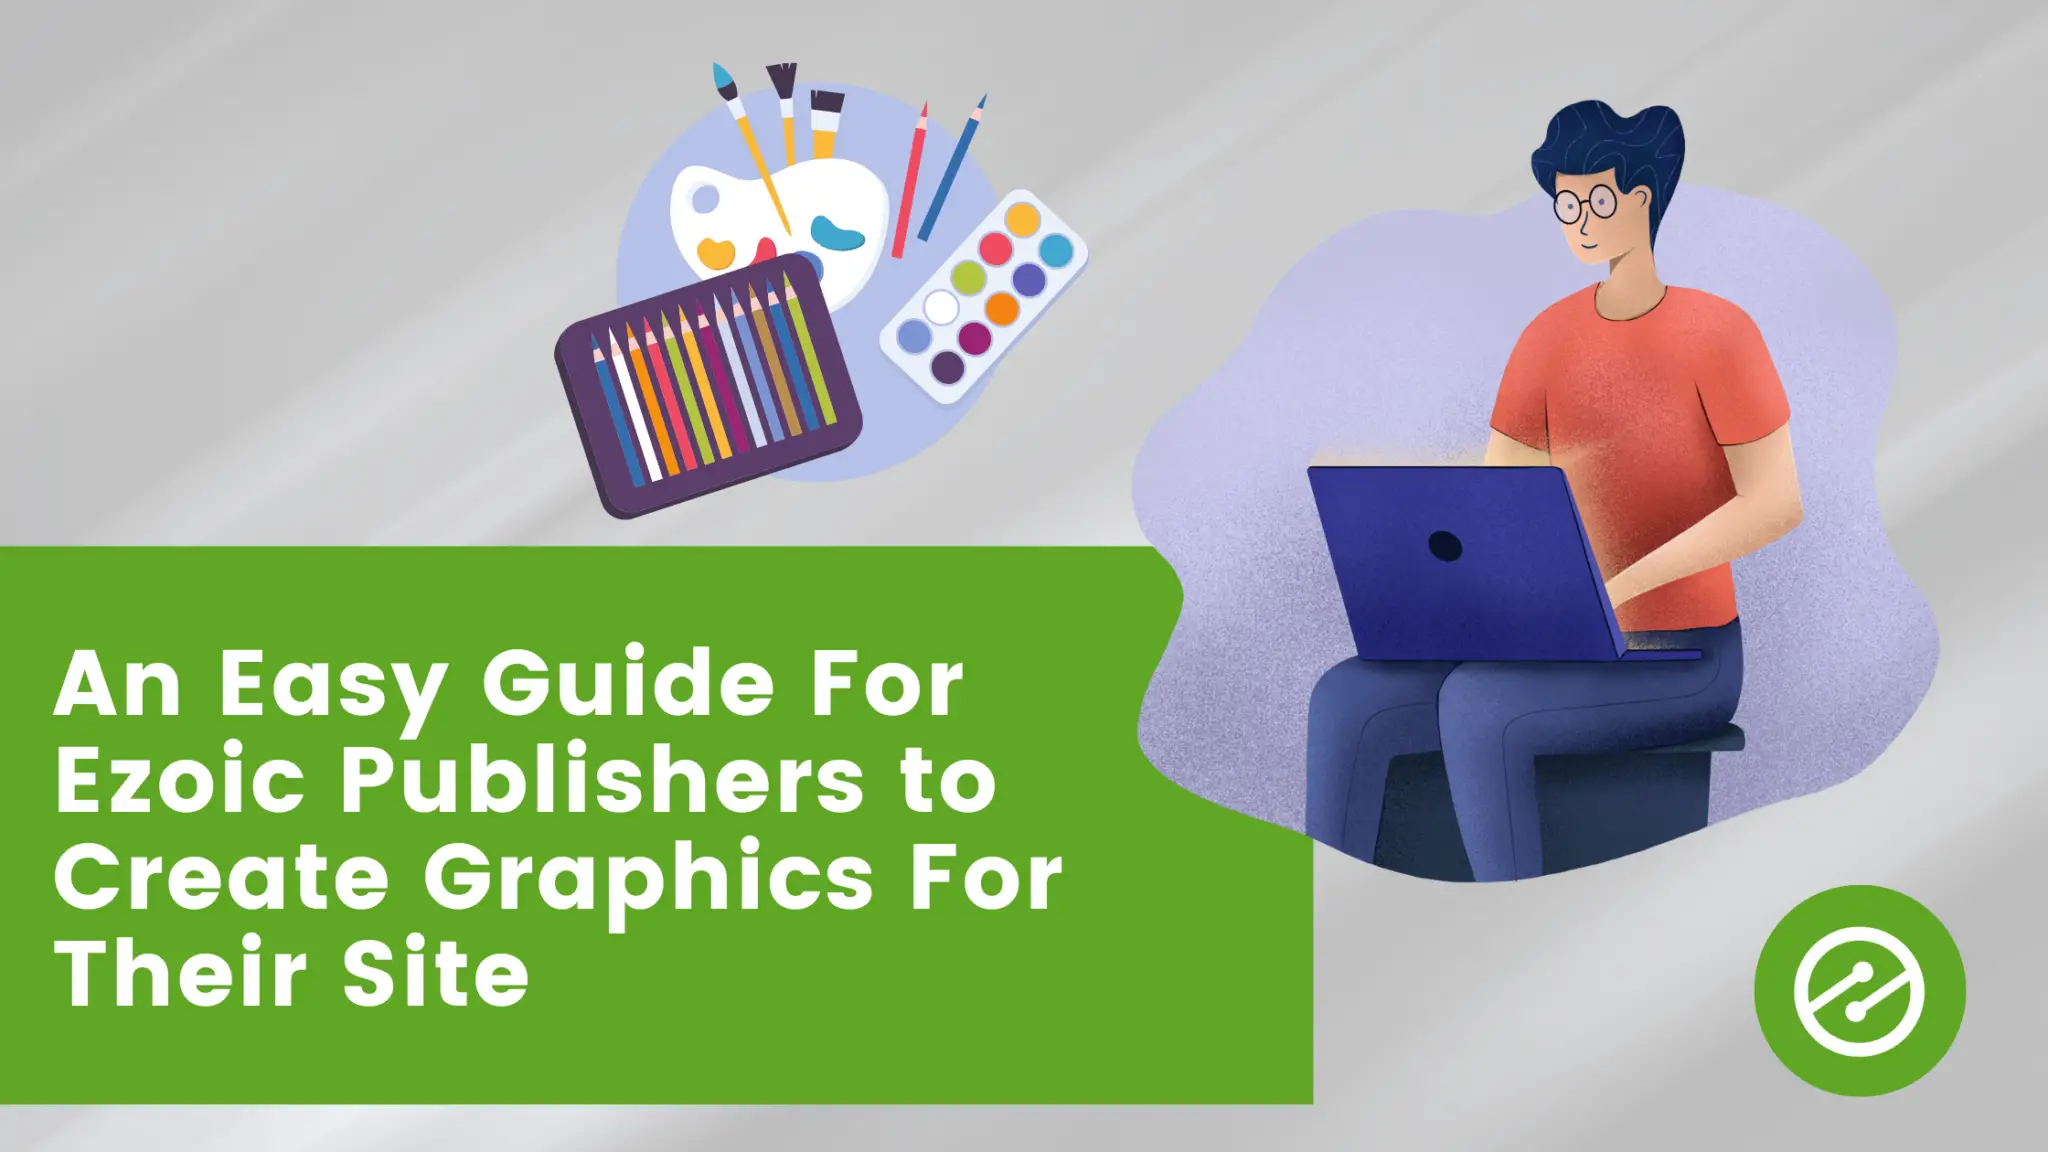 Create Graphics For Your Site With This Easy Guide - Ezoic